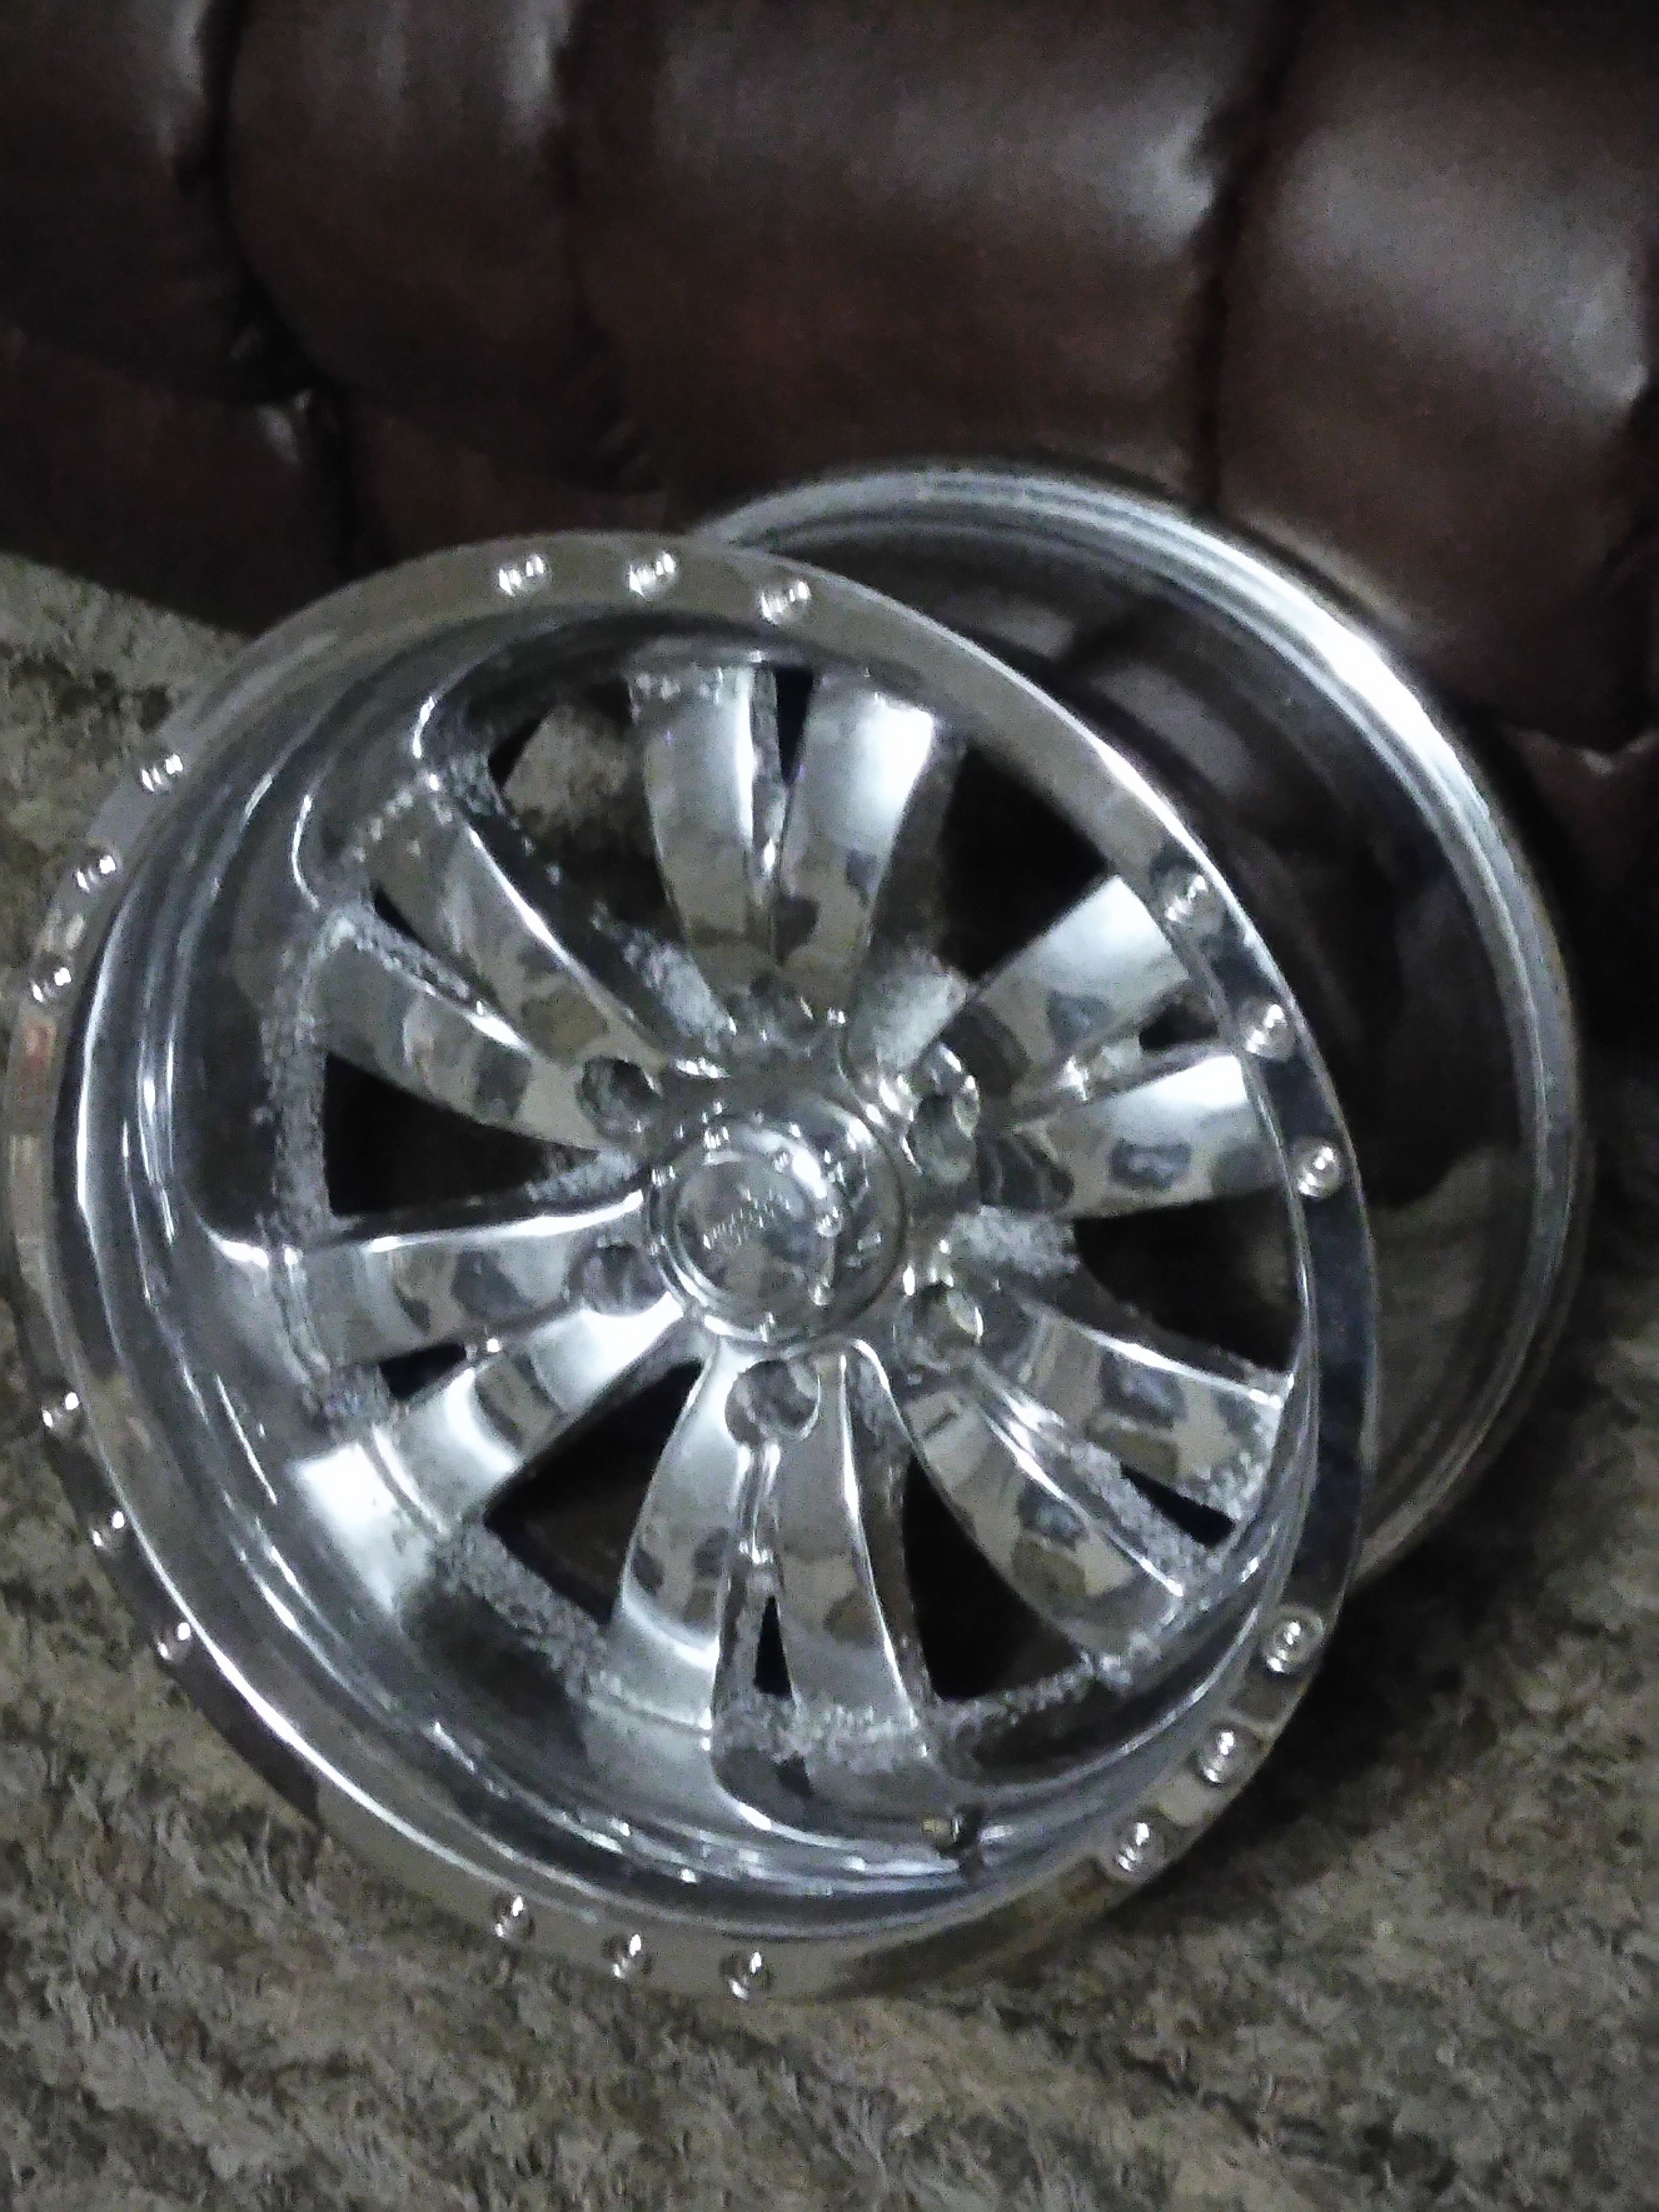 6 lugs Rims for truck need clean$100